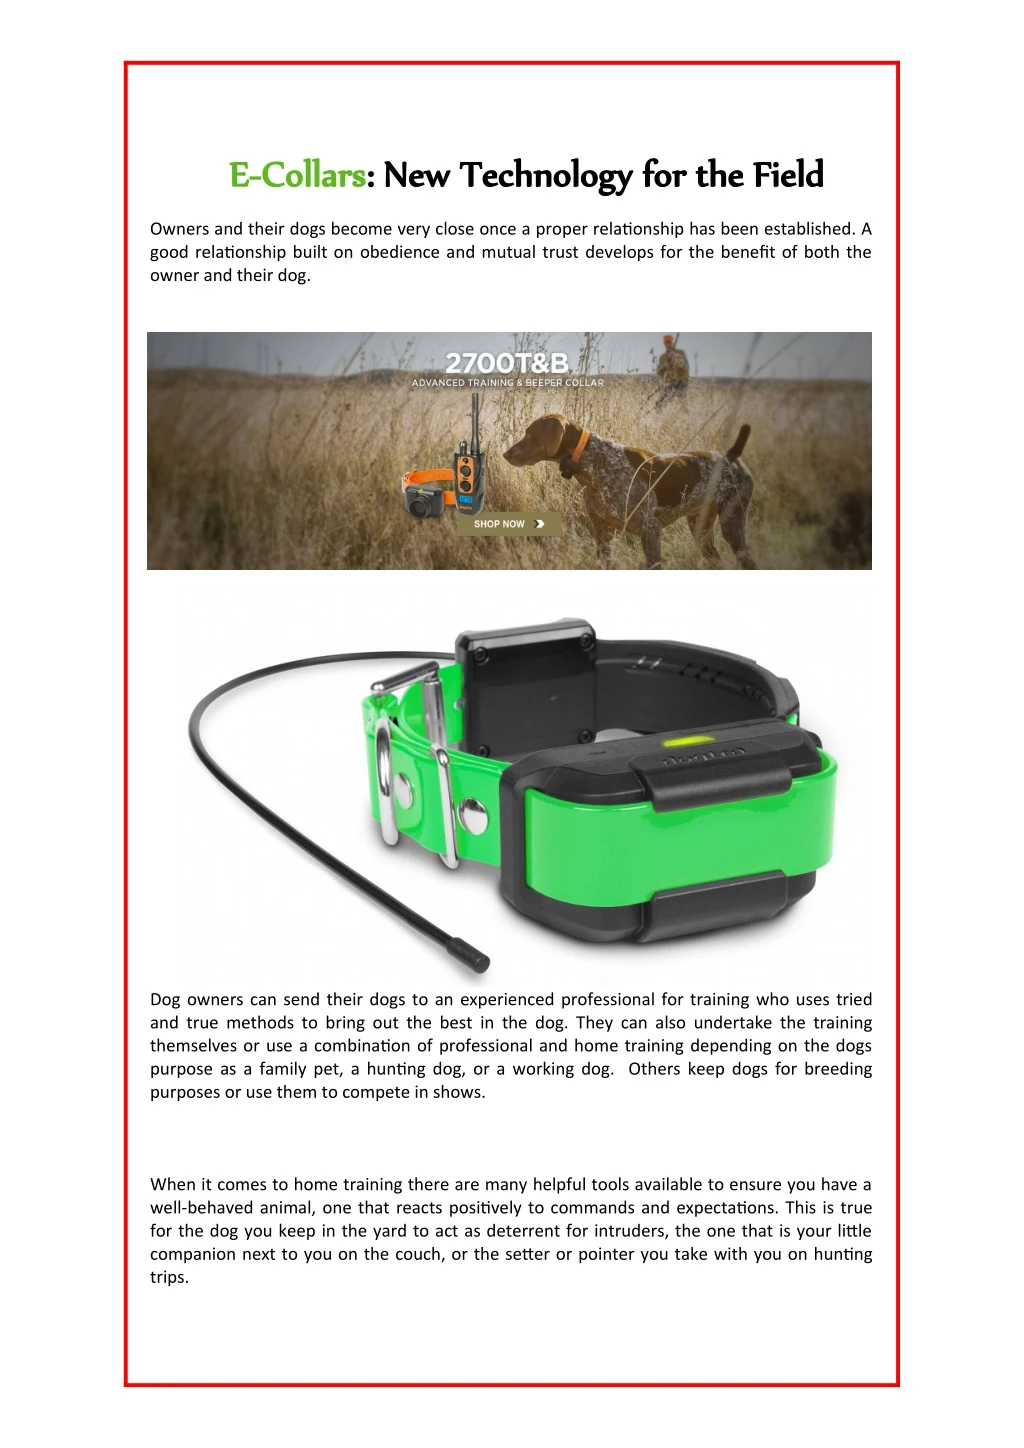 e collars e collars new technology for the field